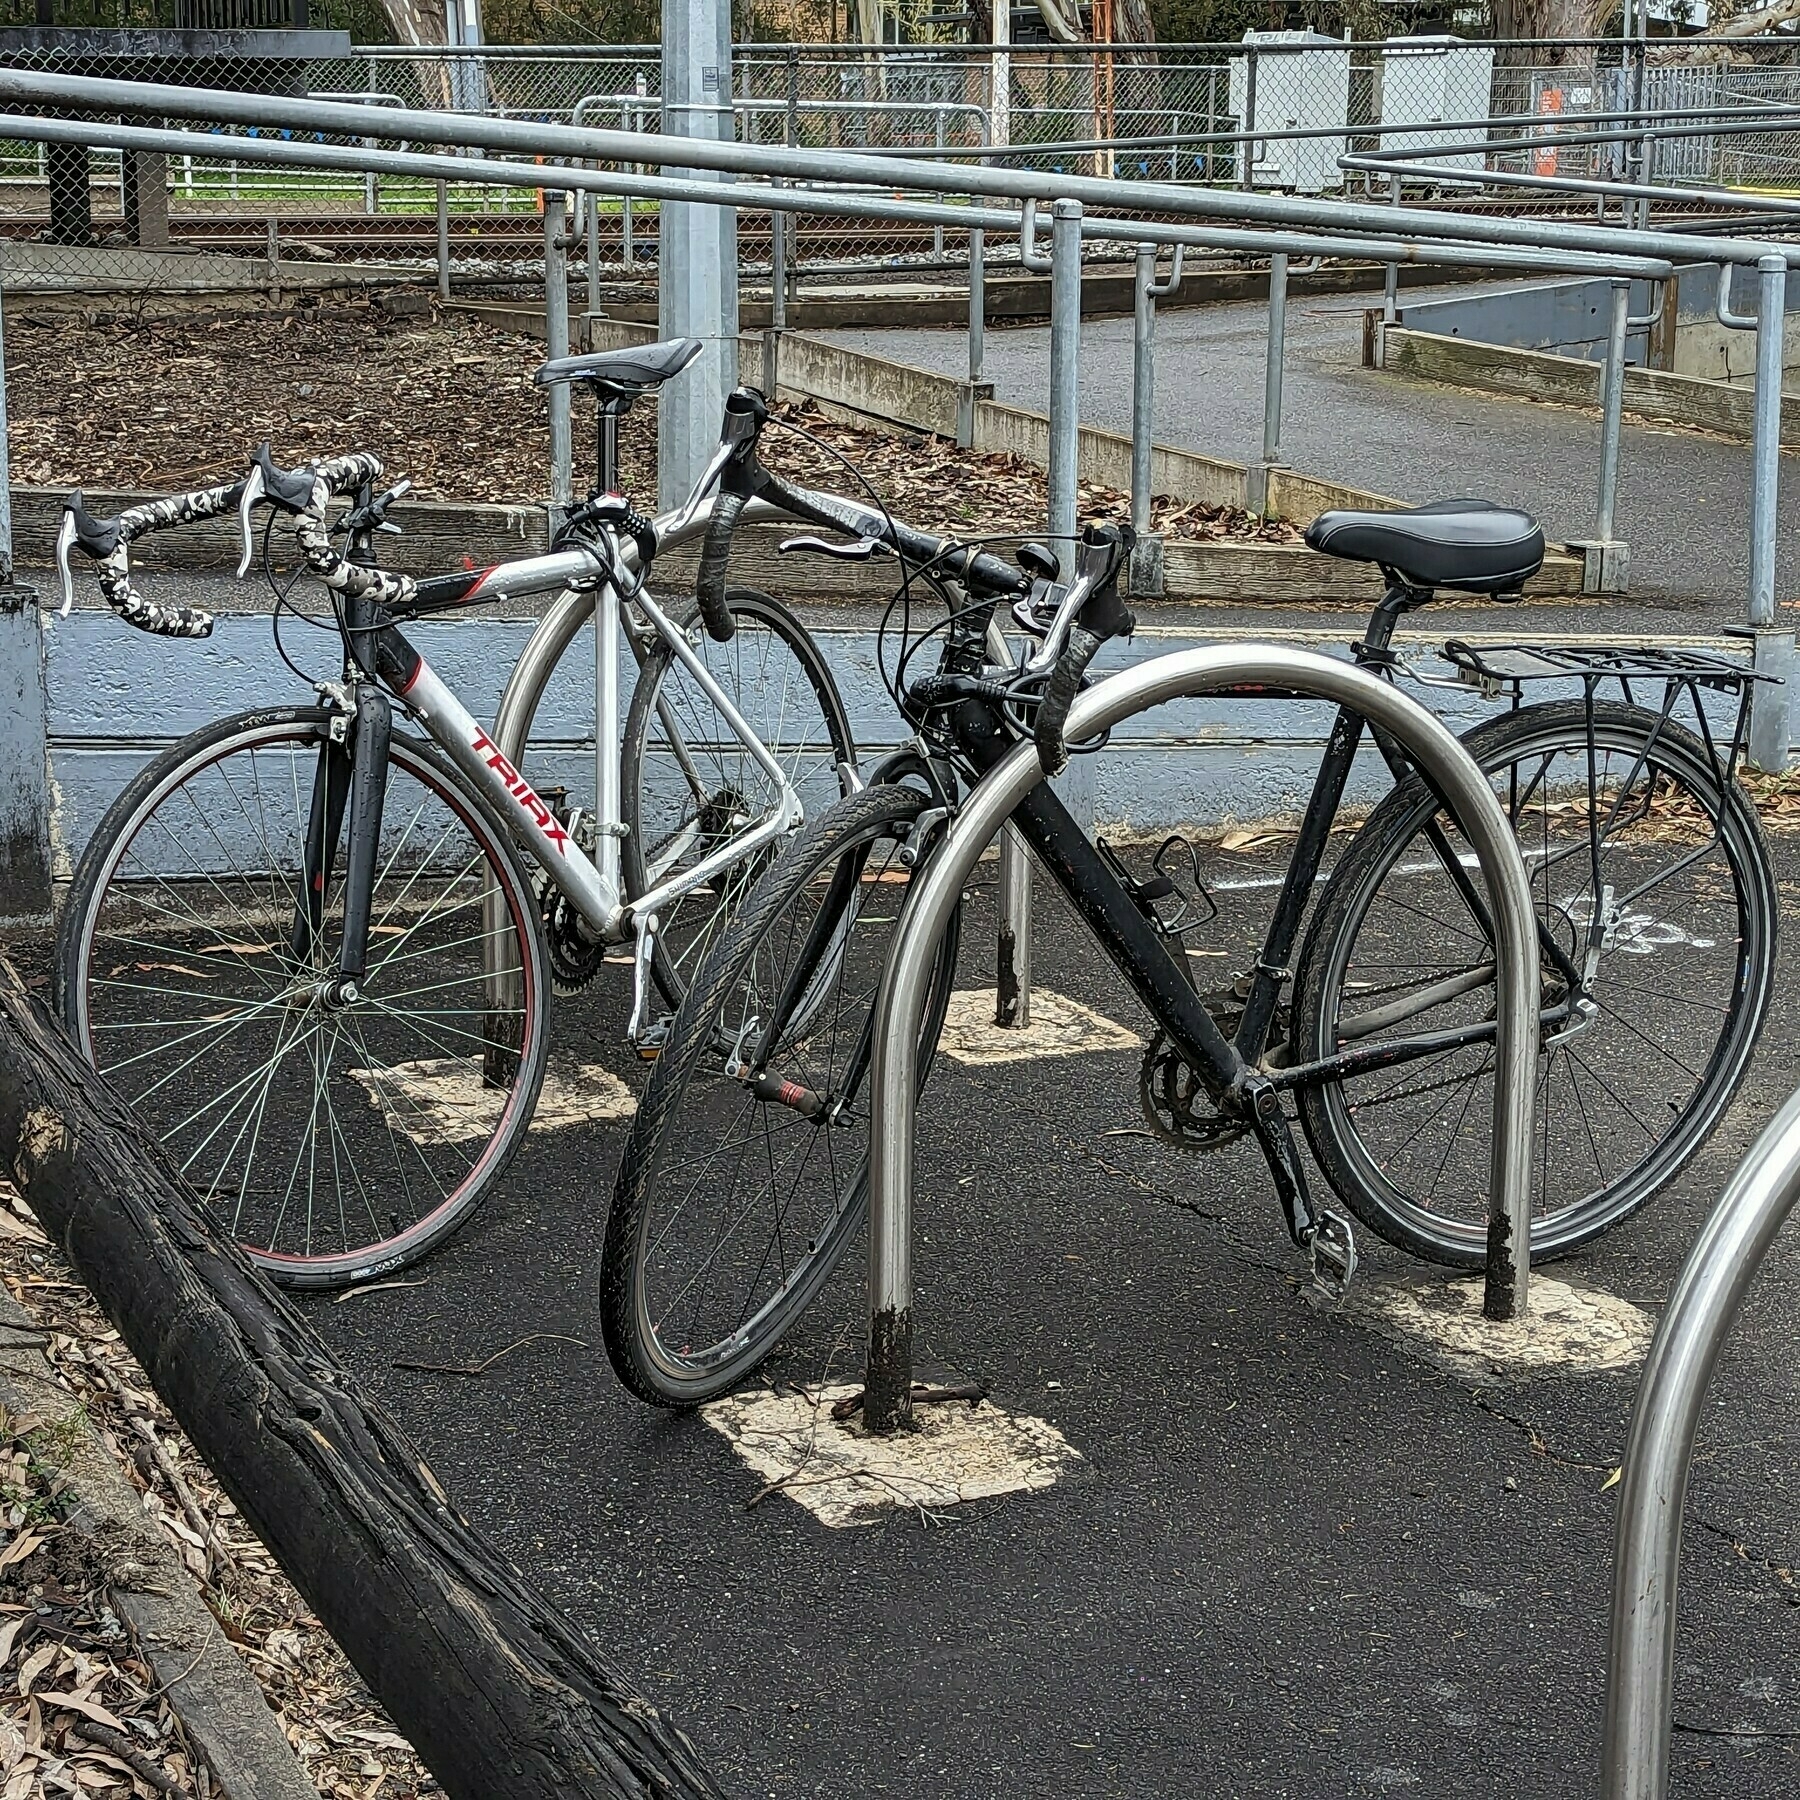 Two bicycles at a bike rack.